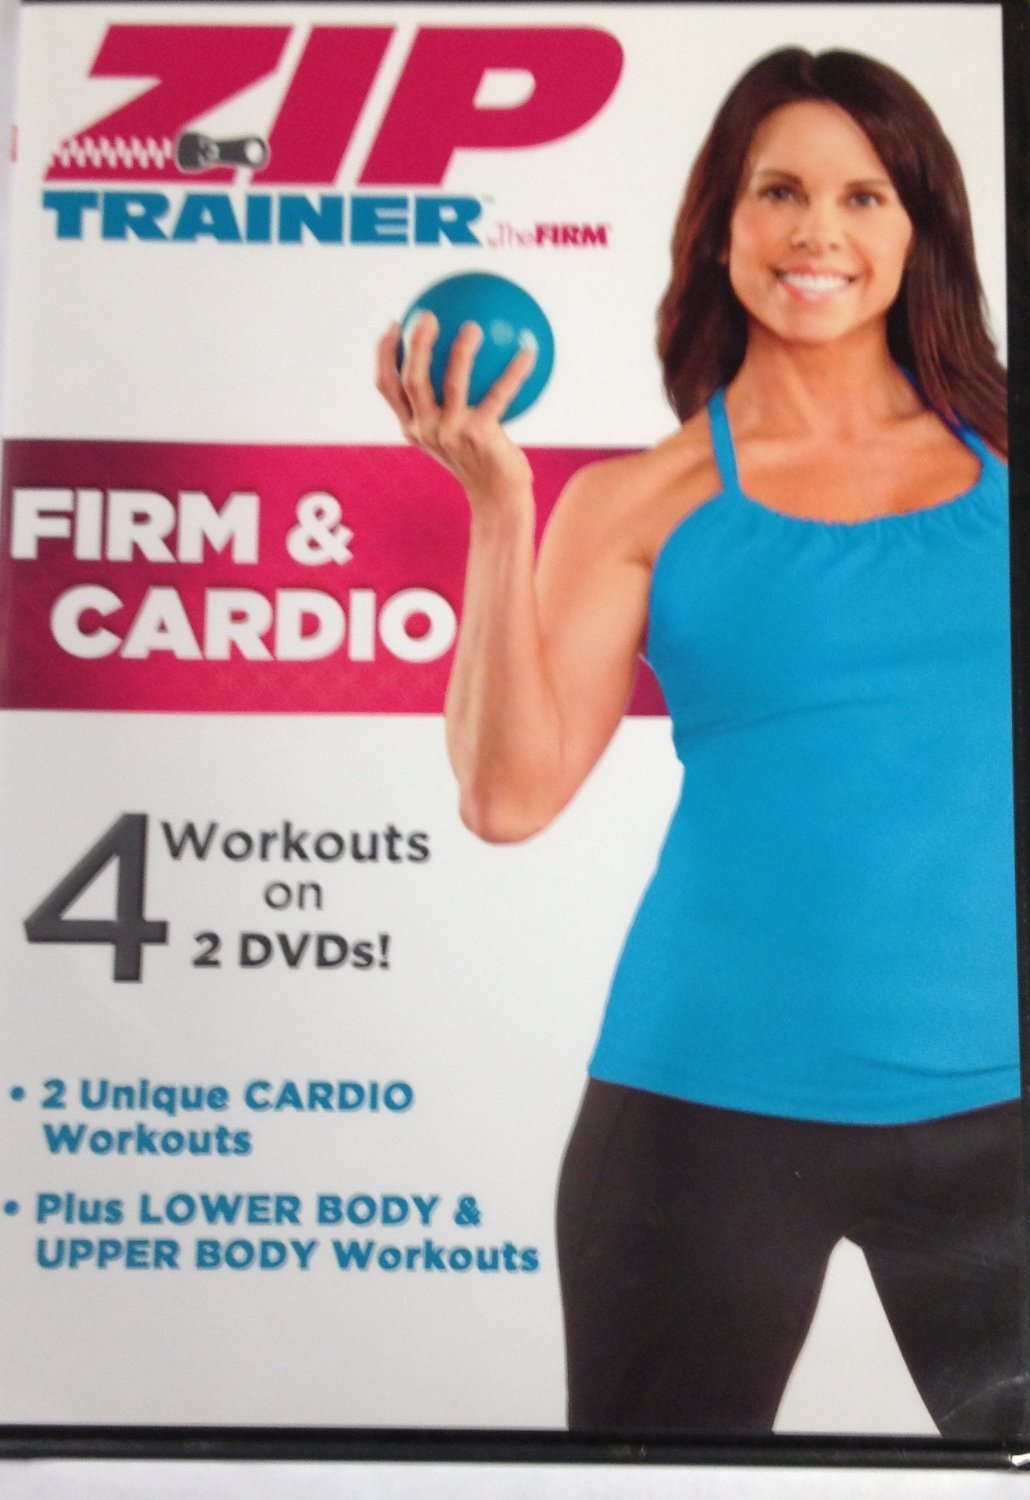 Zip Trainer by The FIRM Firm & Cardio 4 Workouts on 2 DVDs